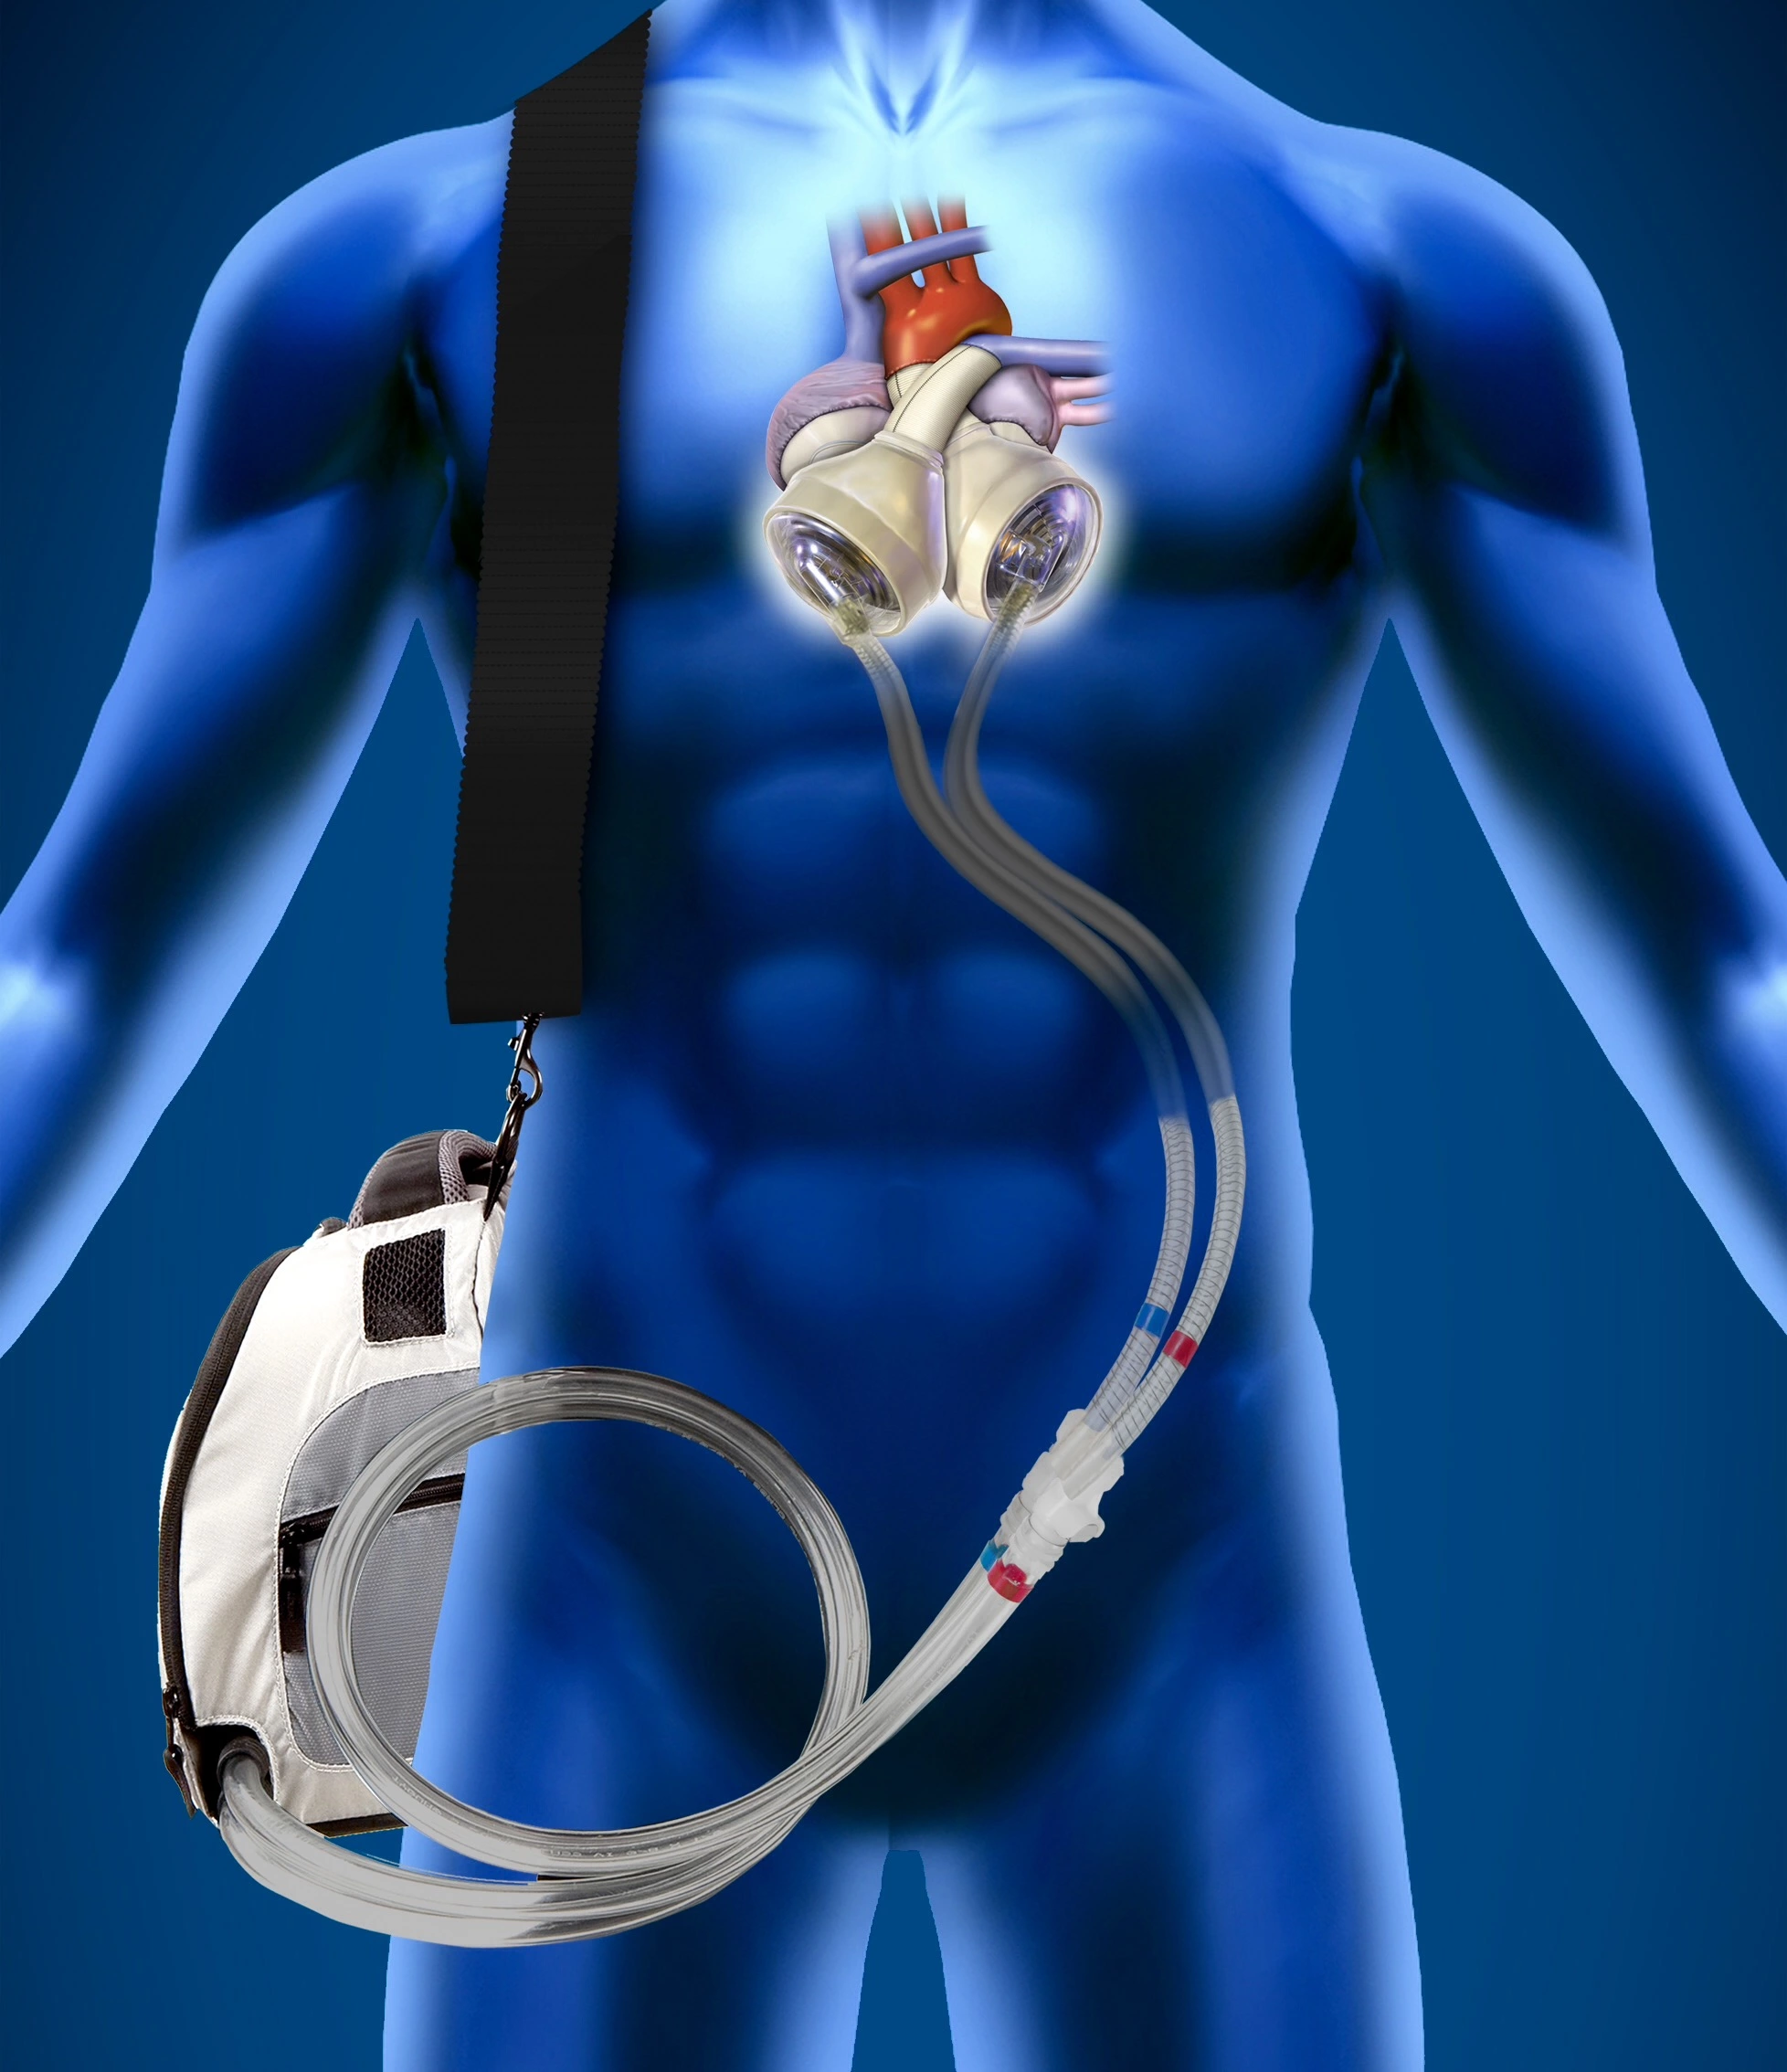 The artificial heart is located in the place of the natural heart in the patient's chest and is connected through tubes to a monitoring device outside the body that the patient carries at all times